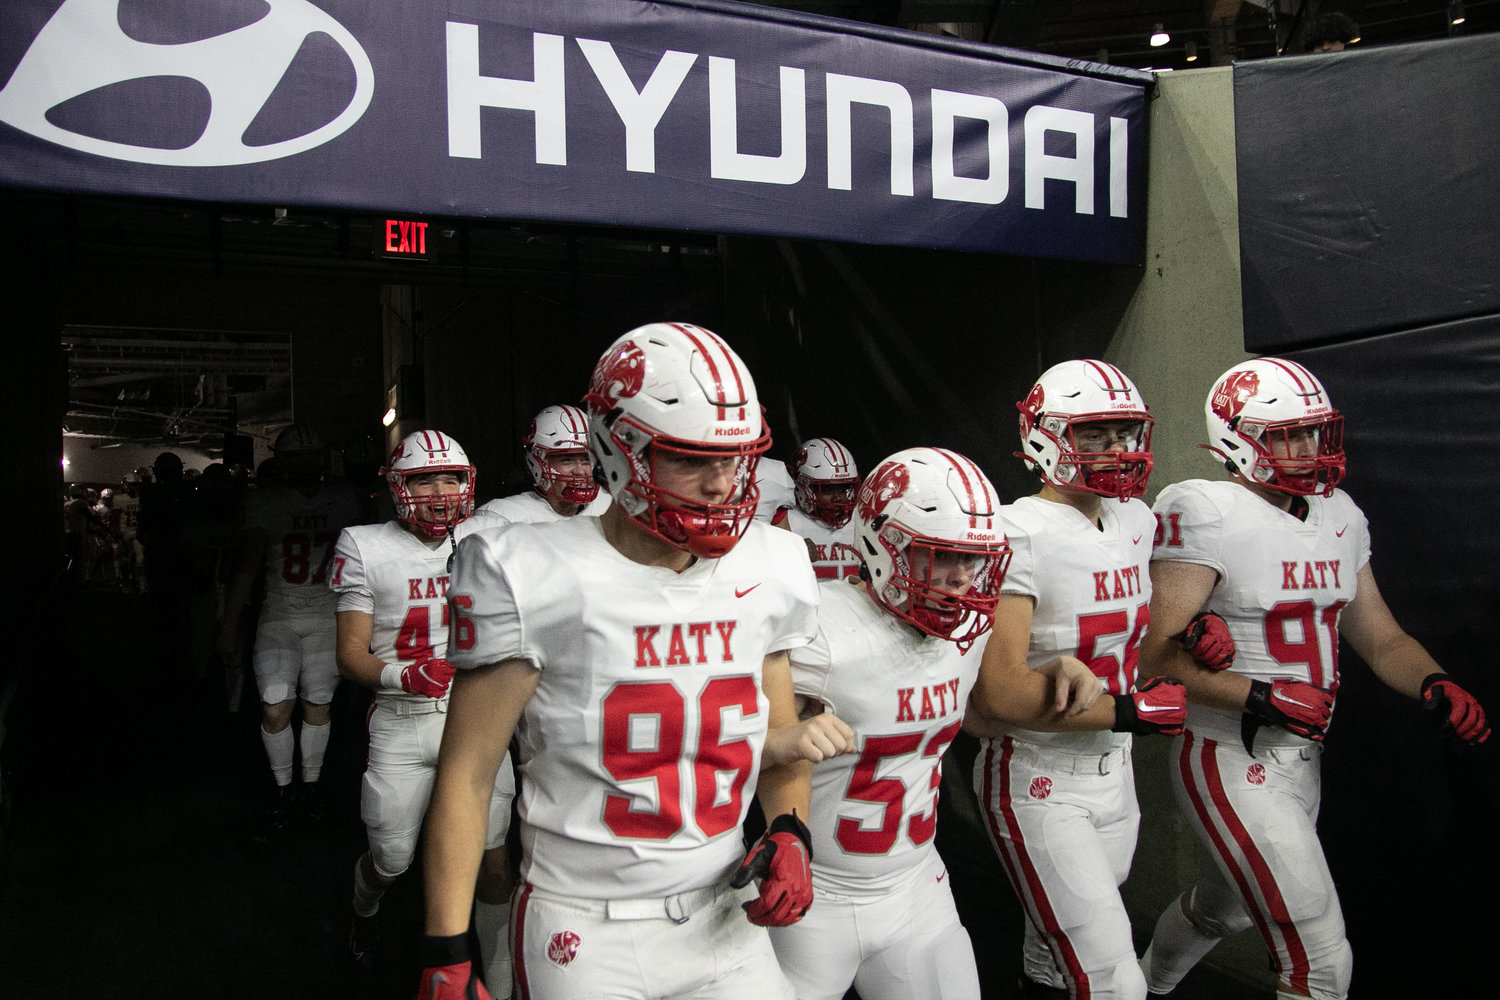 Katy players head to the field before Friday's Class 6A-Division II Region III Final between Katy and C.E. King at NRG Stadium.